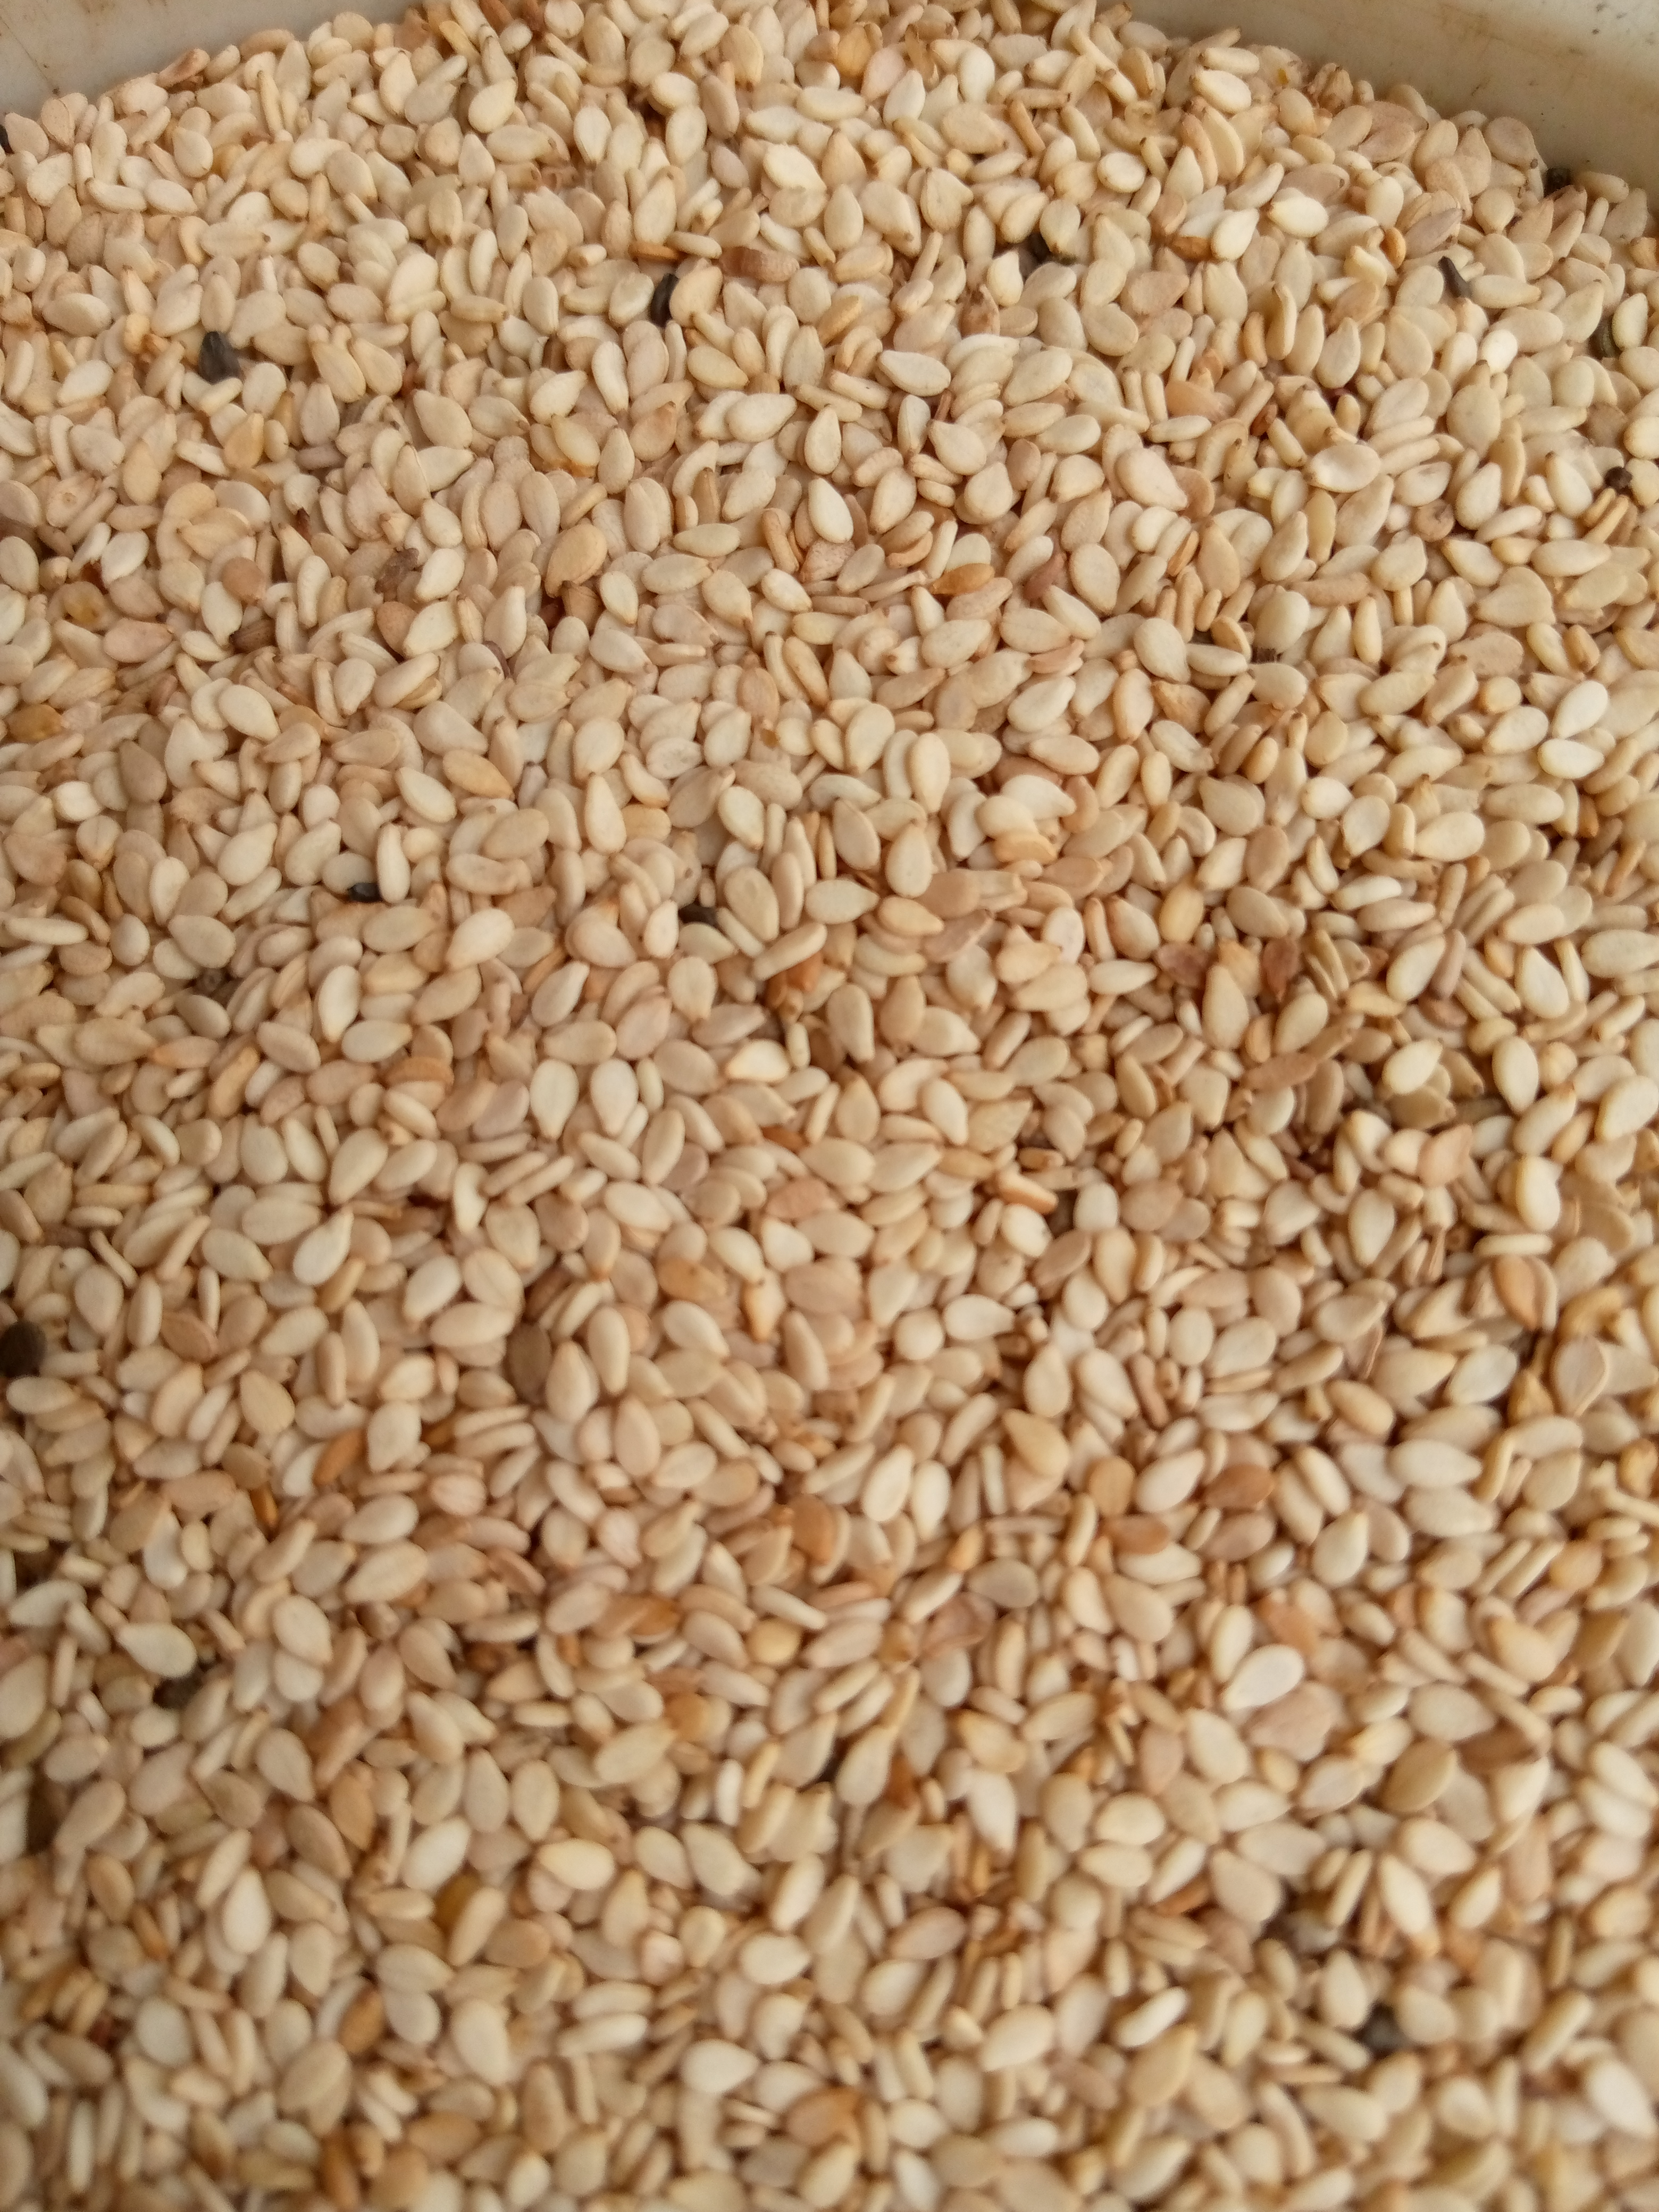 Product image - We are regular seller of sesame seed.we have white sesame seed in good quality and in large quantity for sale.our sesame seed is 98%dried and clean.To order your sesame seed, contact us on call or Whatsapp +2348169418699 or +2348026295645.